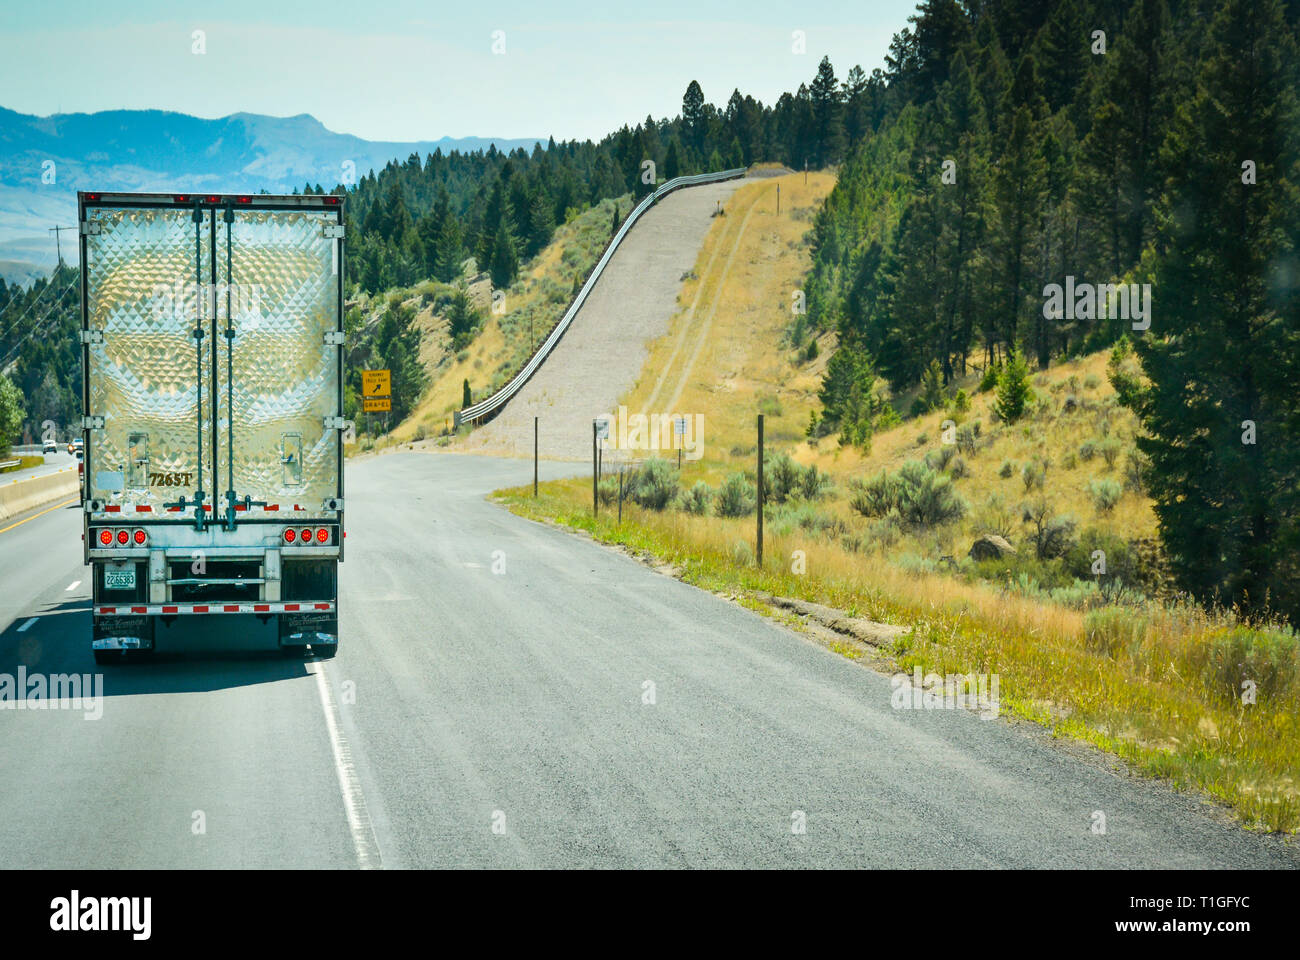 A big rig truck heads downhill alongside an empty runaway truck ramp up a steep slope off of the interstate I-90 highway in Montana, USA Stock Photo